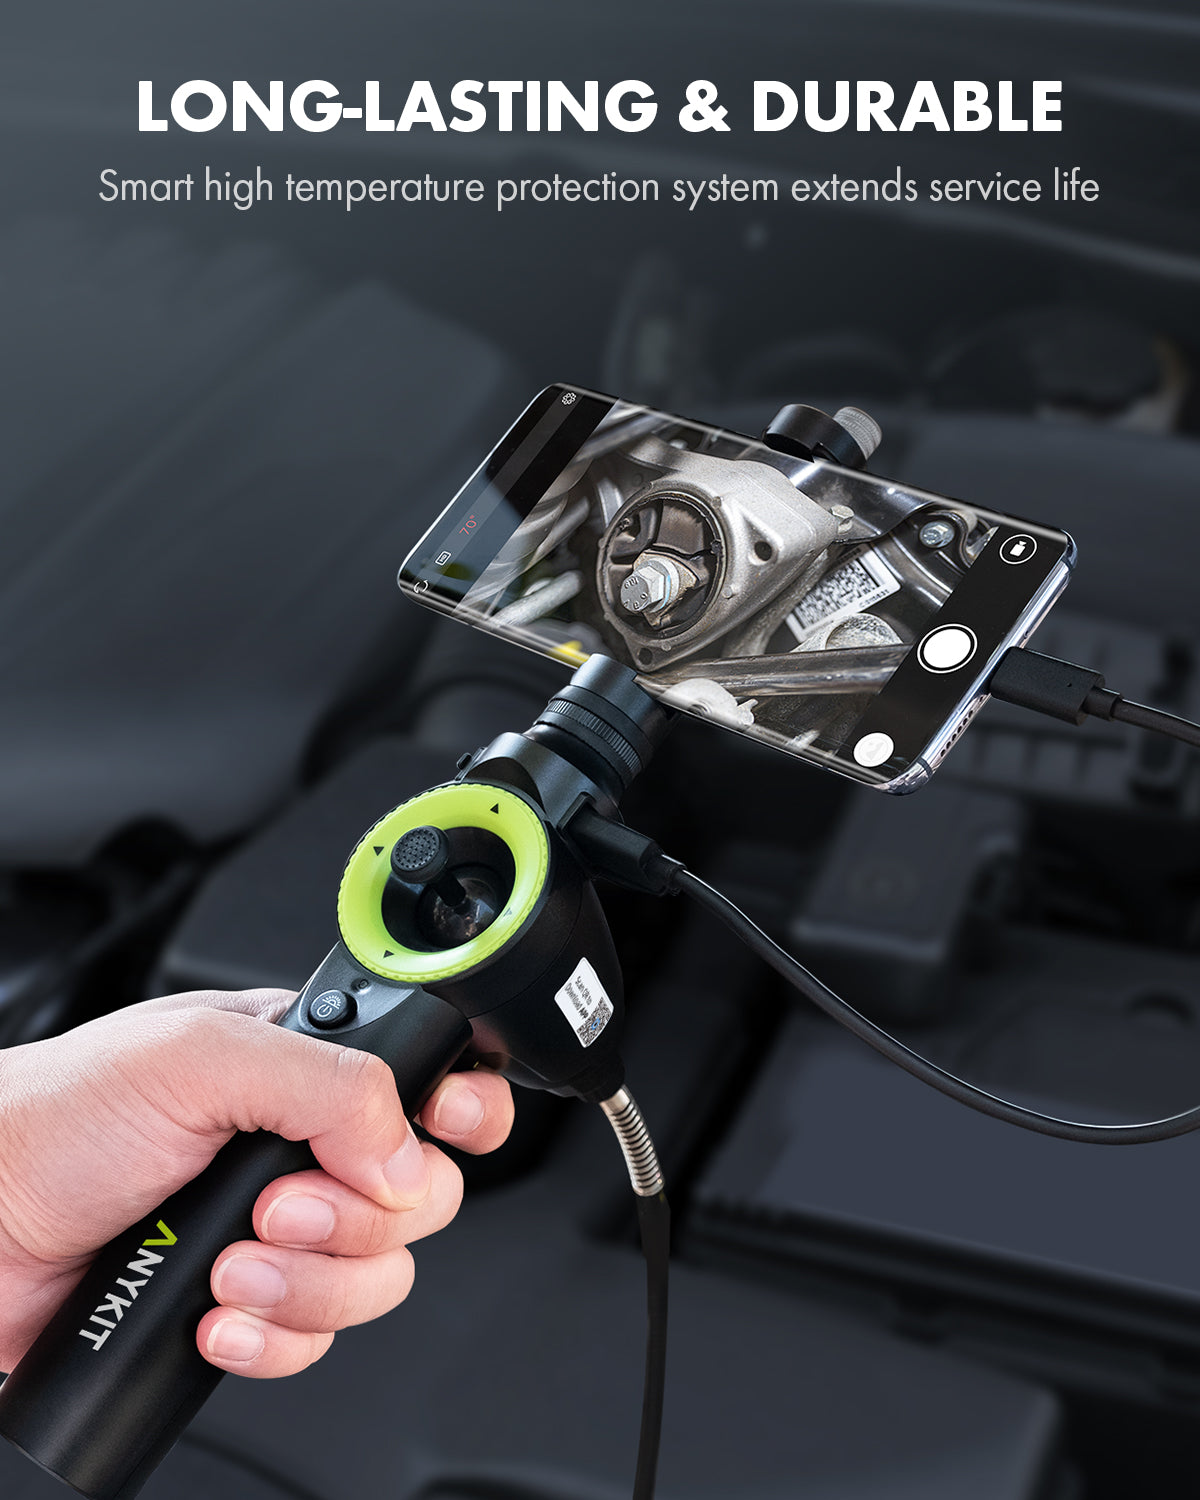 Anykit 360° Articulating Borescope, Joystick Articulating Endoscope Inspection Camera with Steerable Probe for Automotive Aircraft Mechanics, Compatible with iPhone and Android (6.5mm/3.3ft)